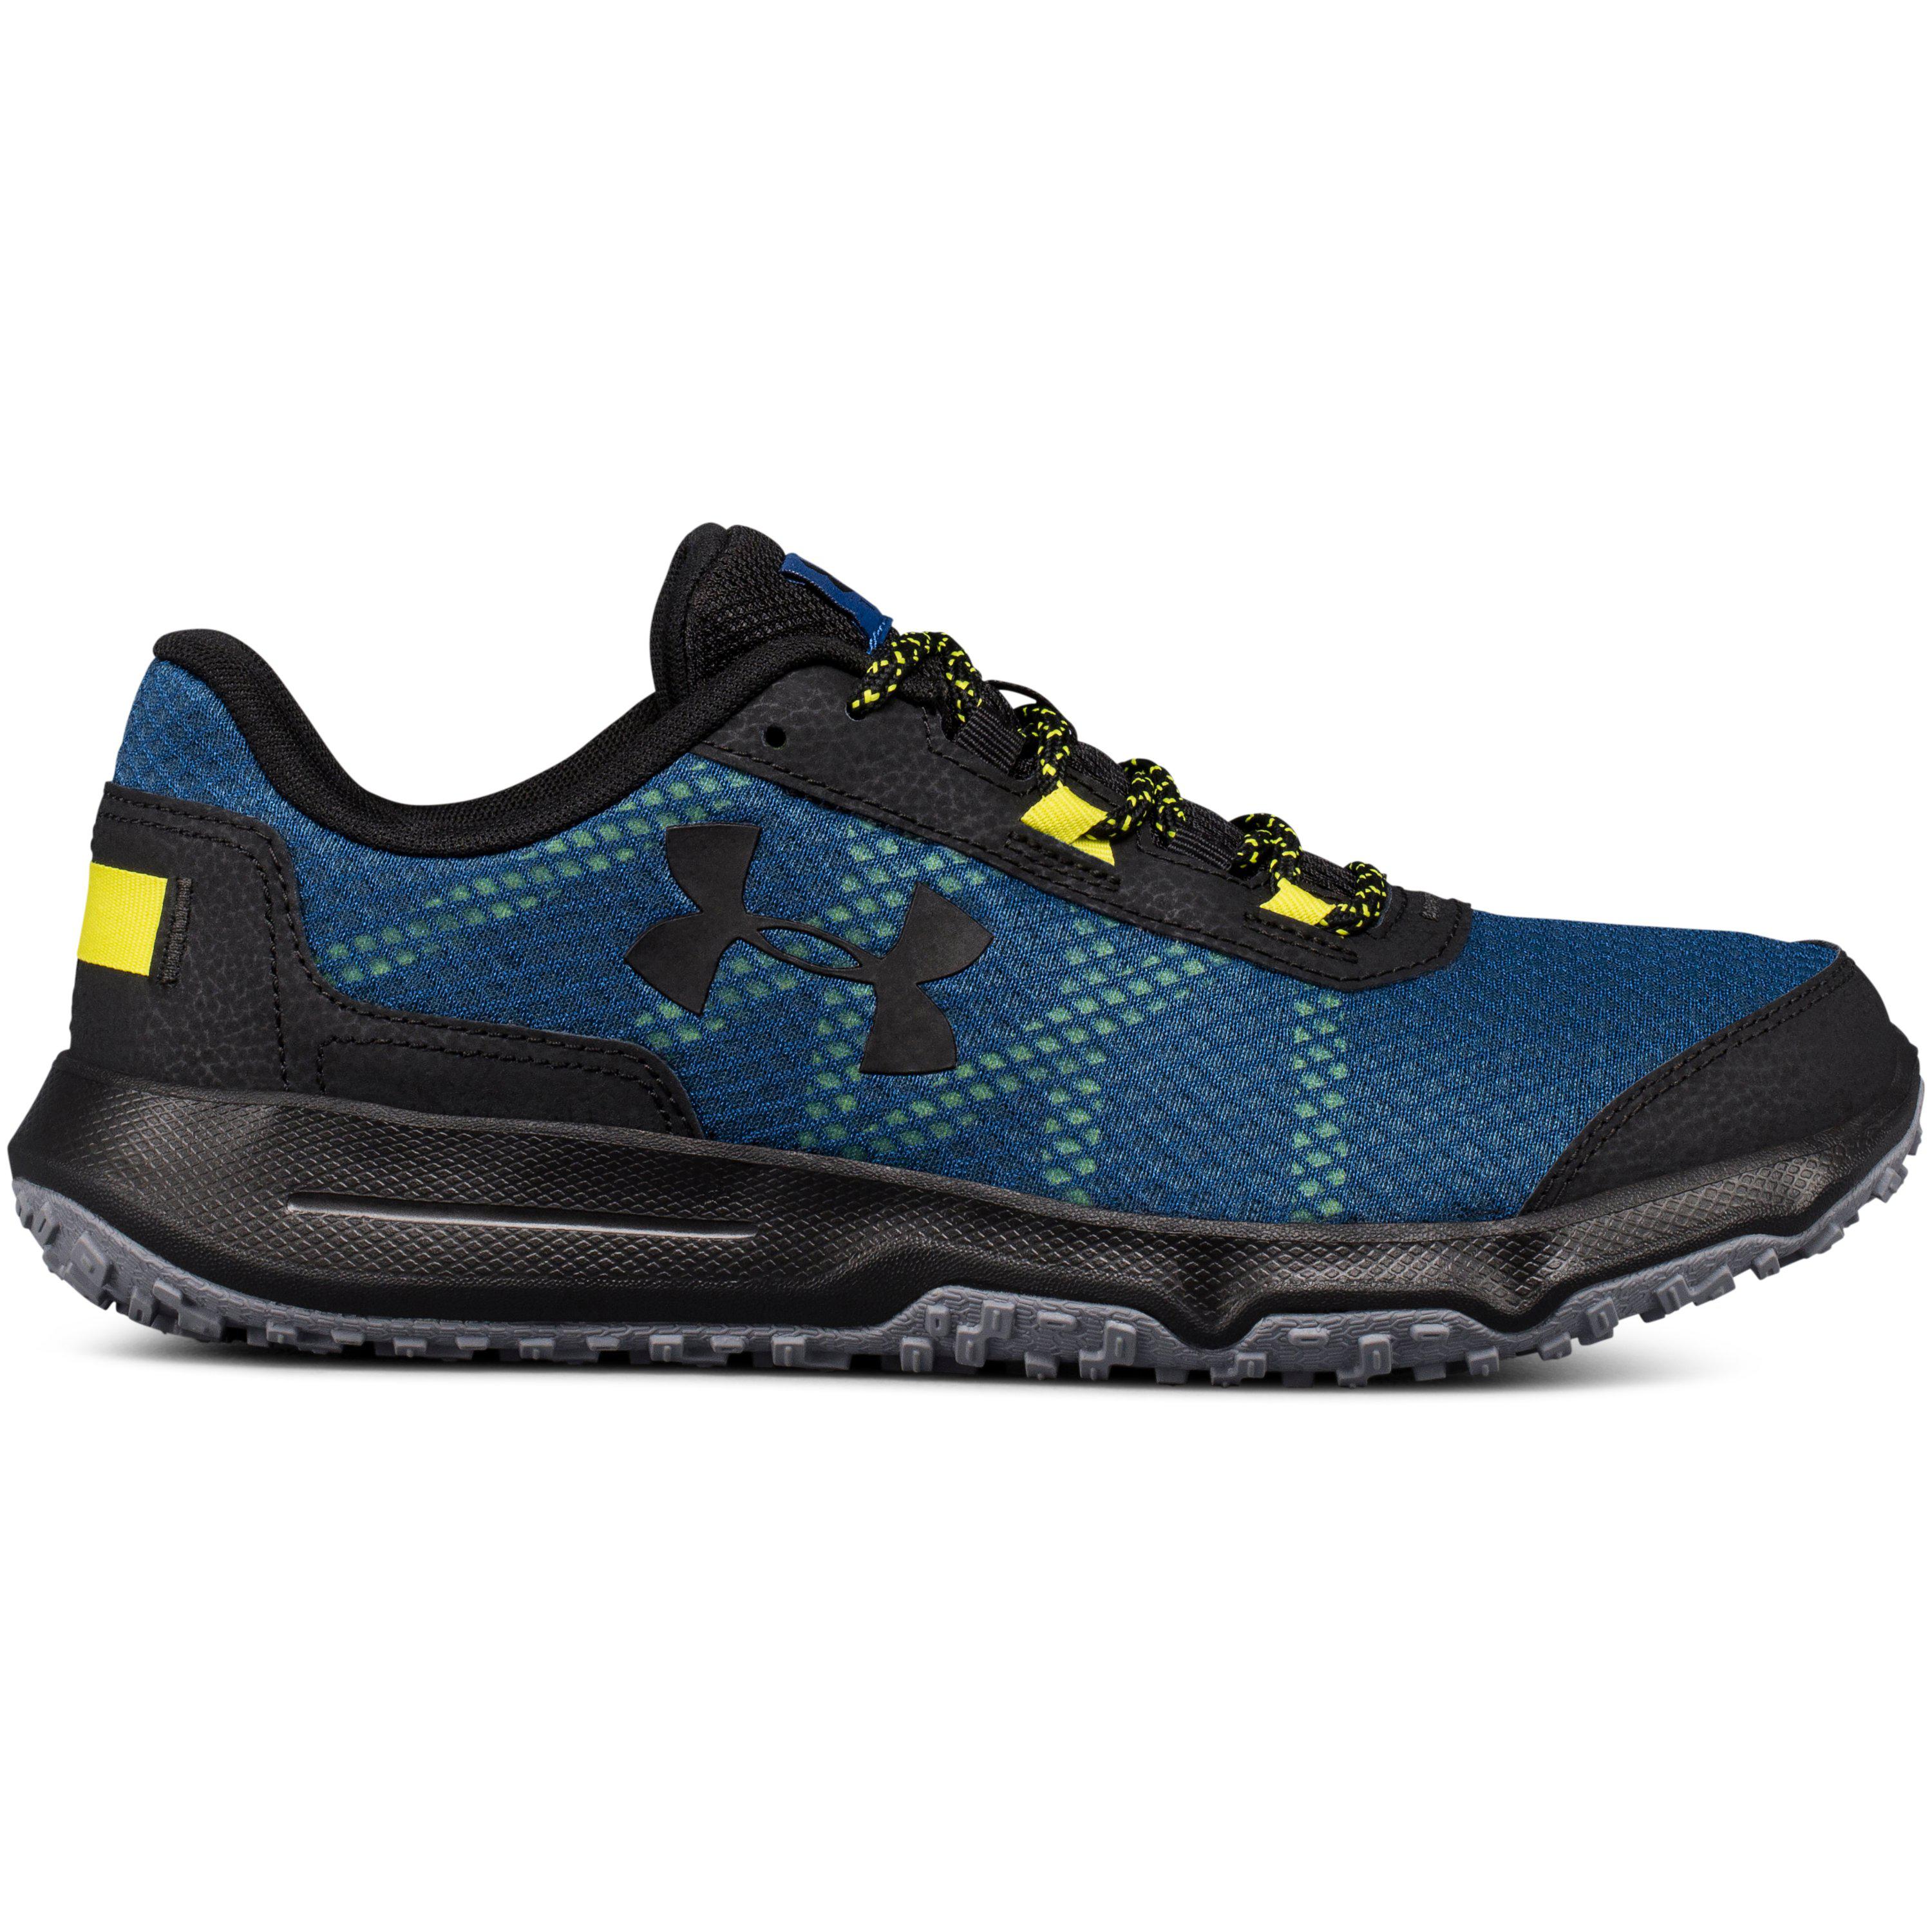 Under Armor Toccoa | lupon.gov.ph